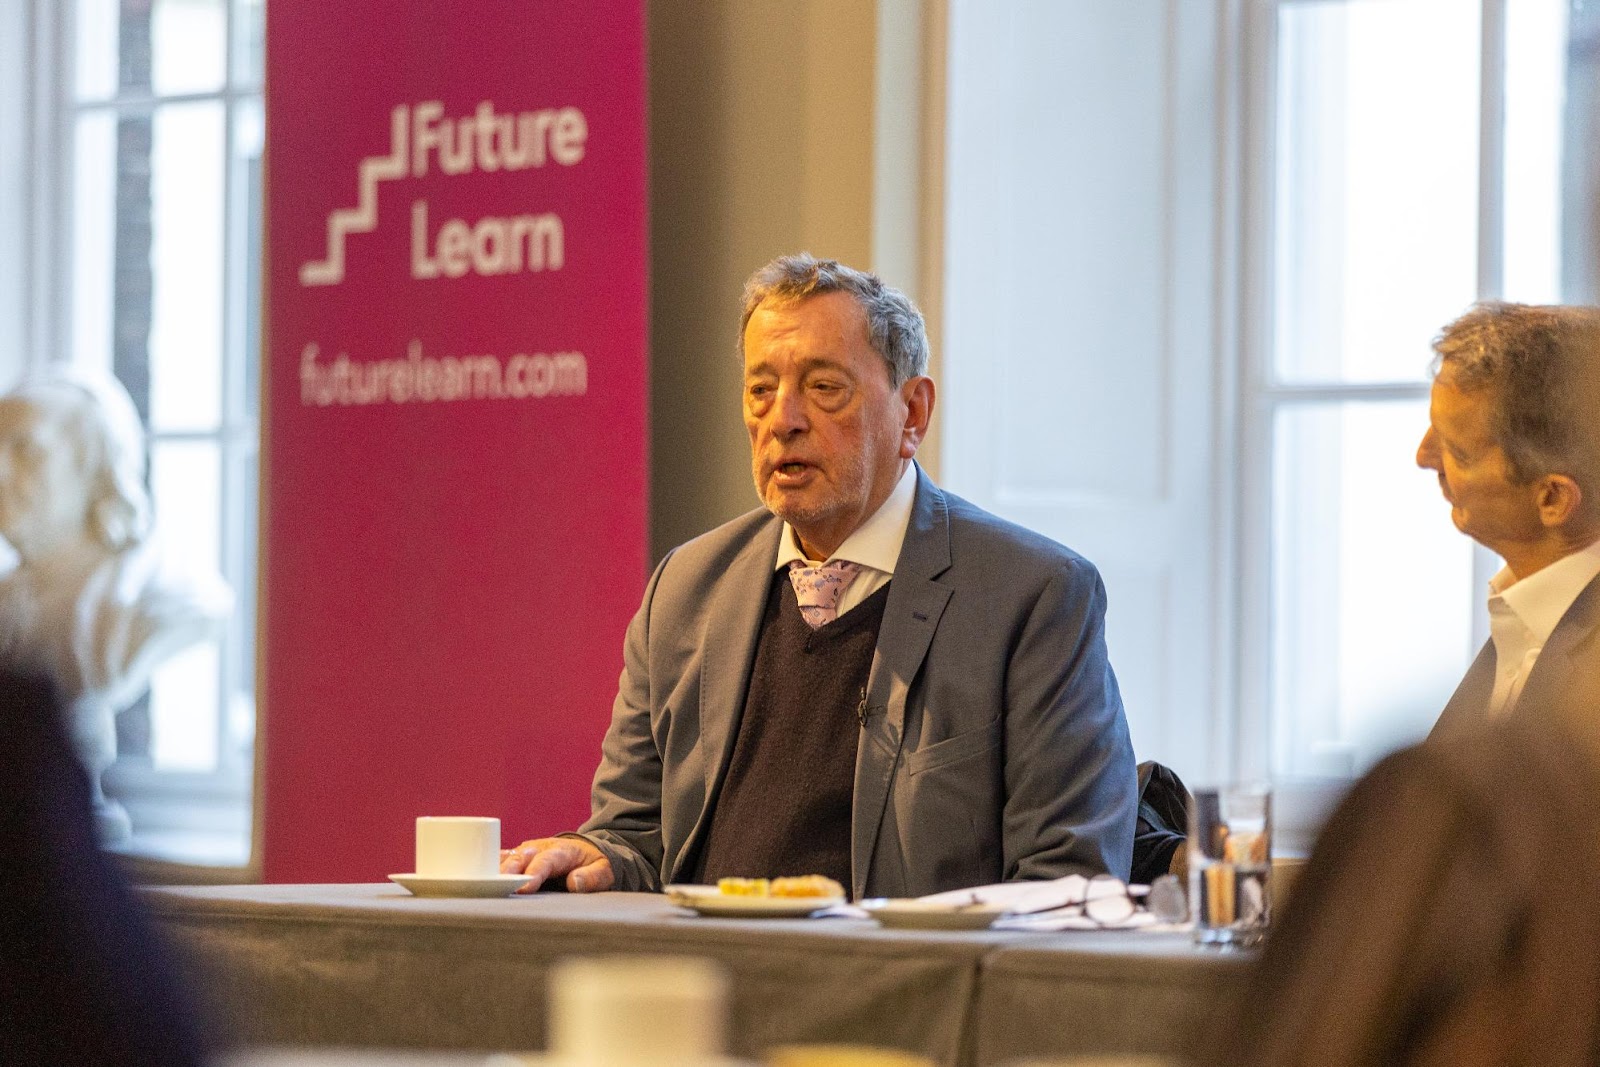 ‘SKILLS, SKILLS, SKILLS’ SHOULD BE PRIORITY FOR NEXT GOVERNMENT, SAYS LORD BLUNKETT